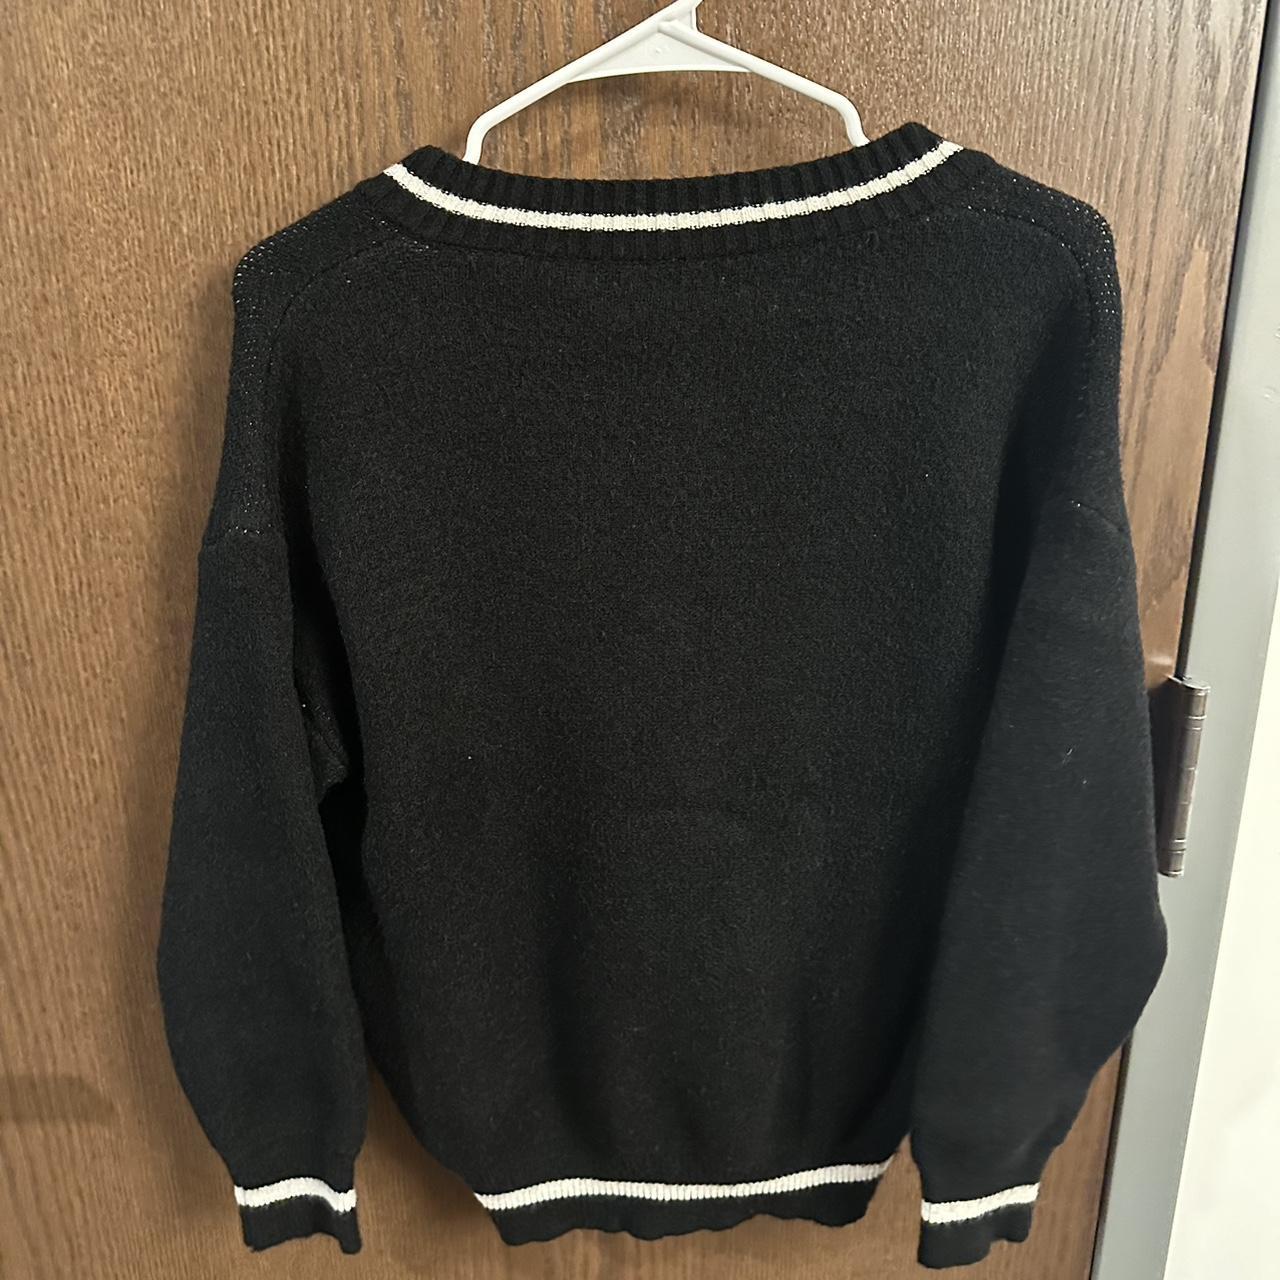 Graphic design pirate knitted sweater 8/10... - Depop